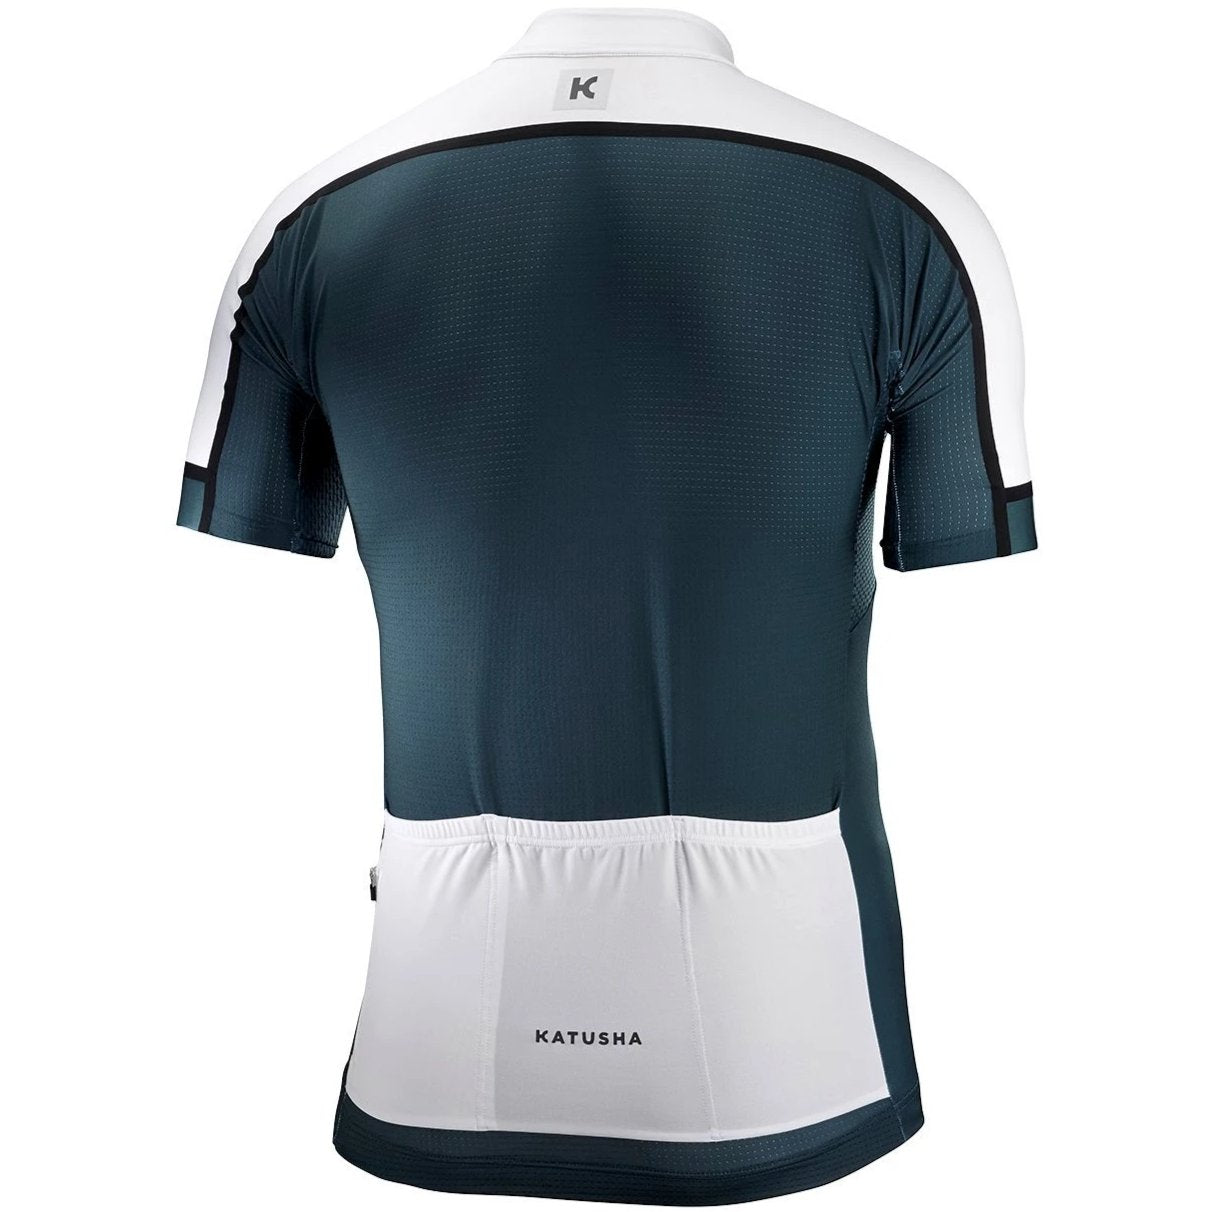 teal cycling jersey